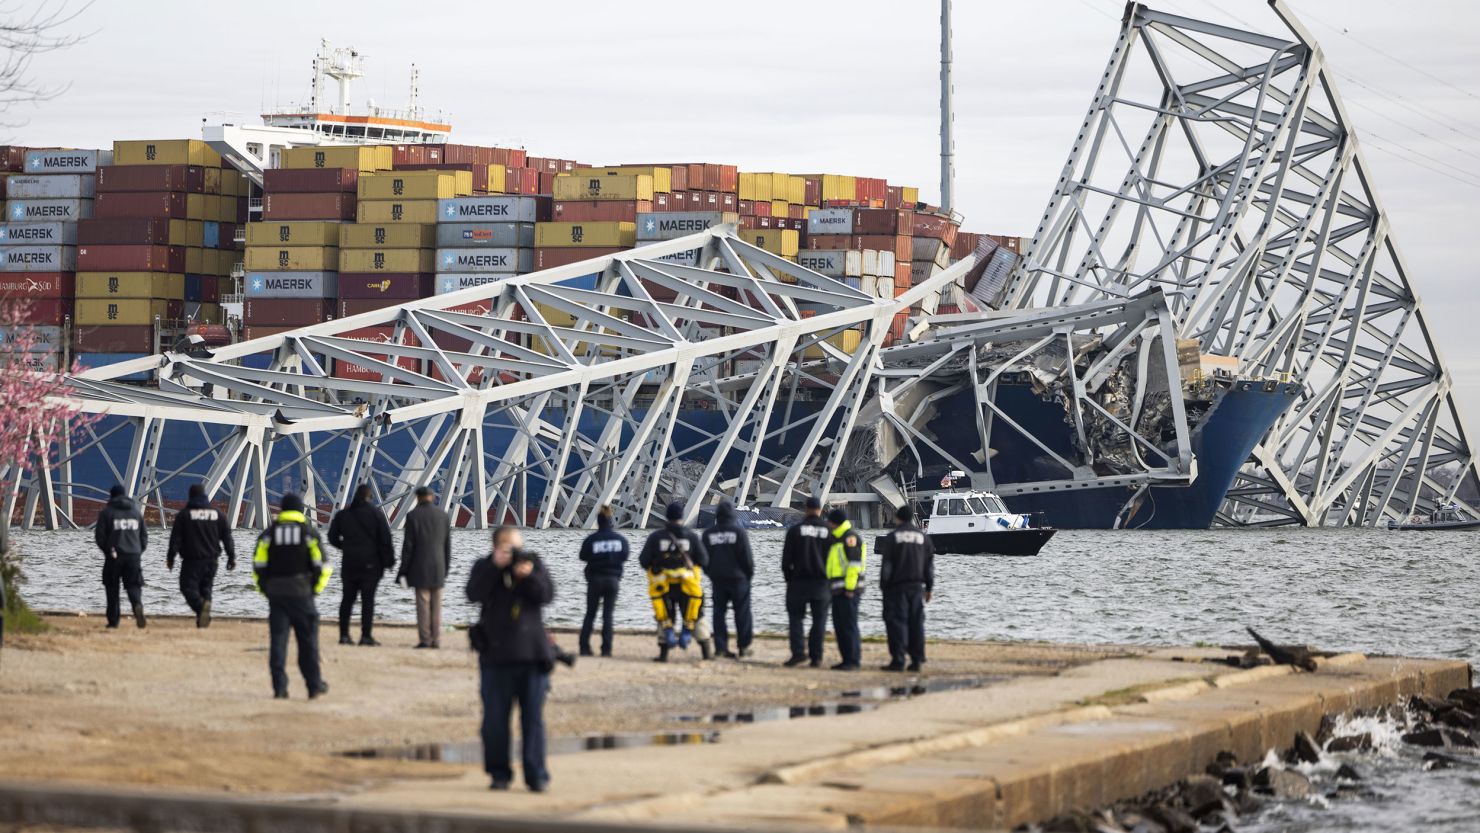 Rescue personnel gather on the shore of the Patapsco River after a container ship ran into the Francis Scott Key Bridge early Tuesday, causing its collapse.